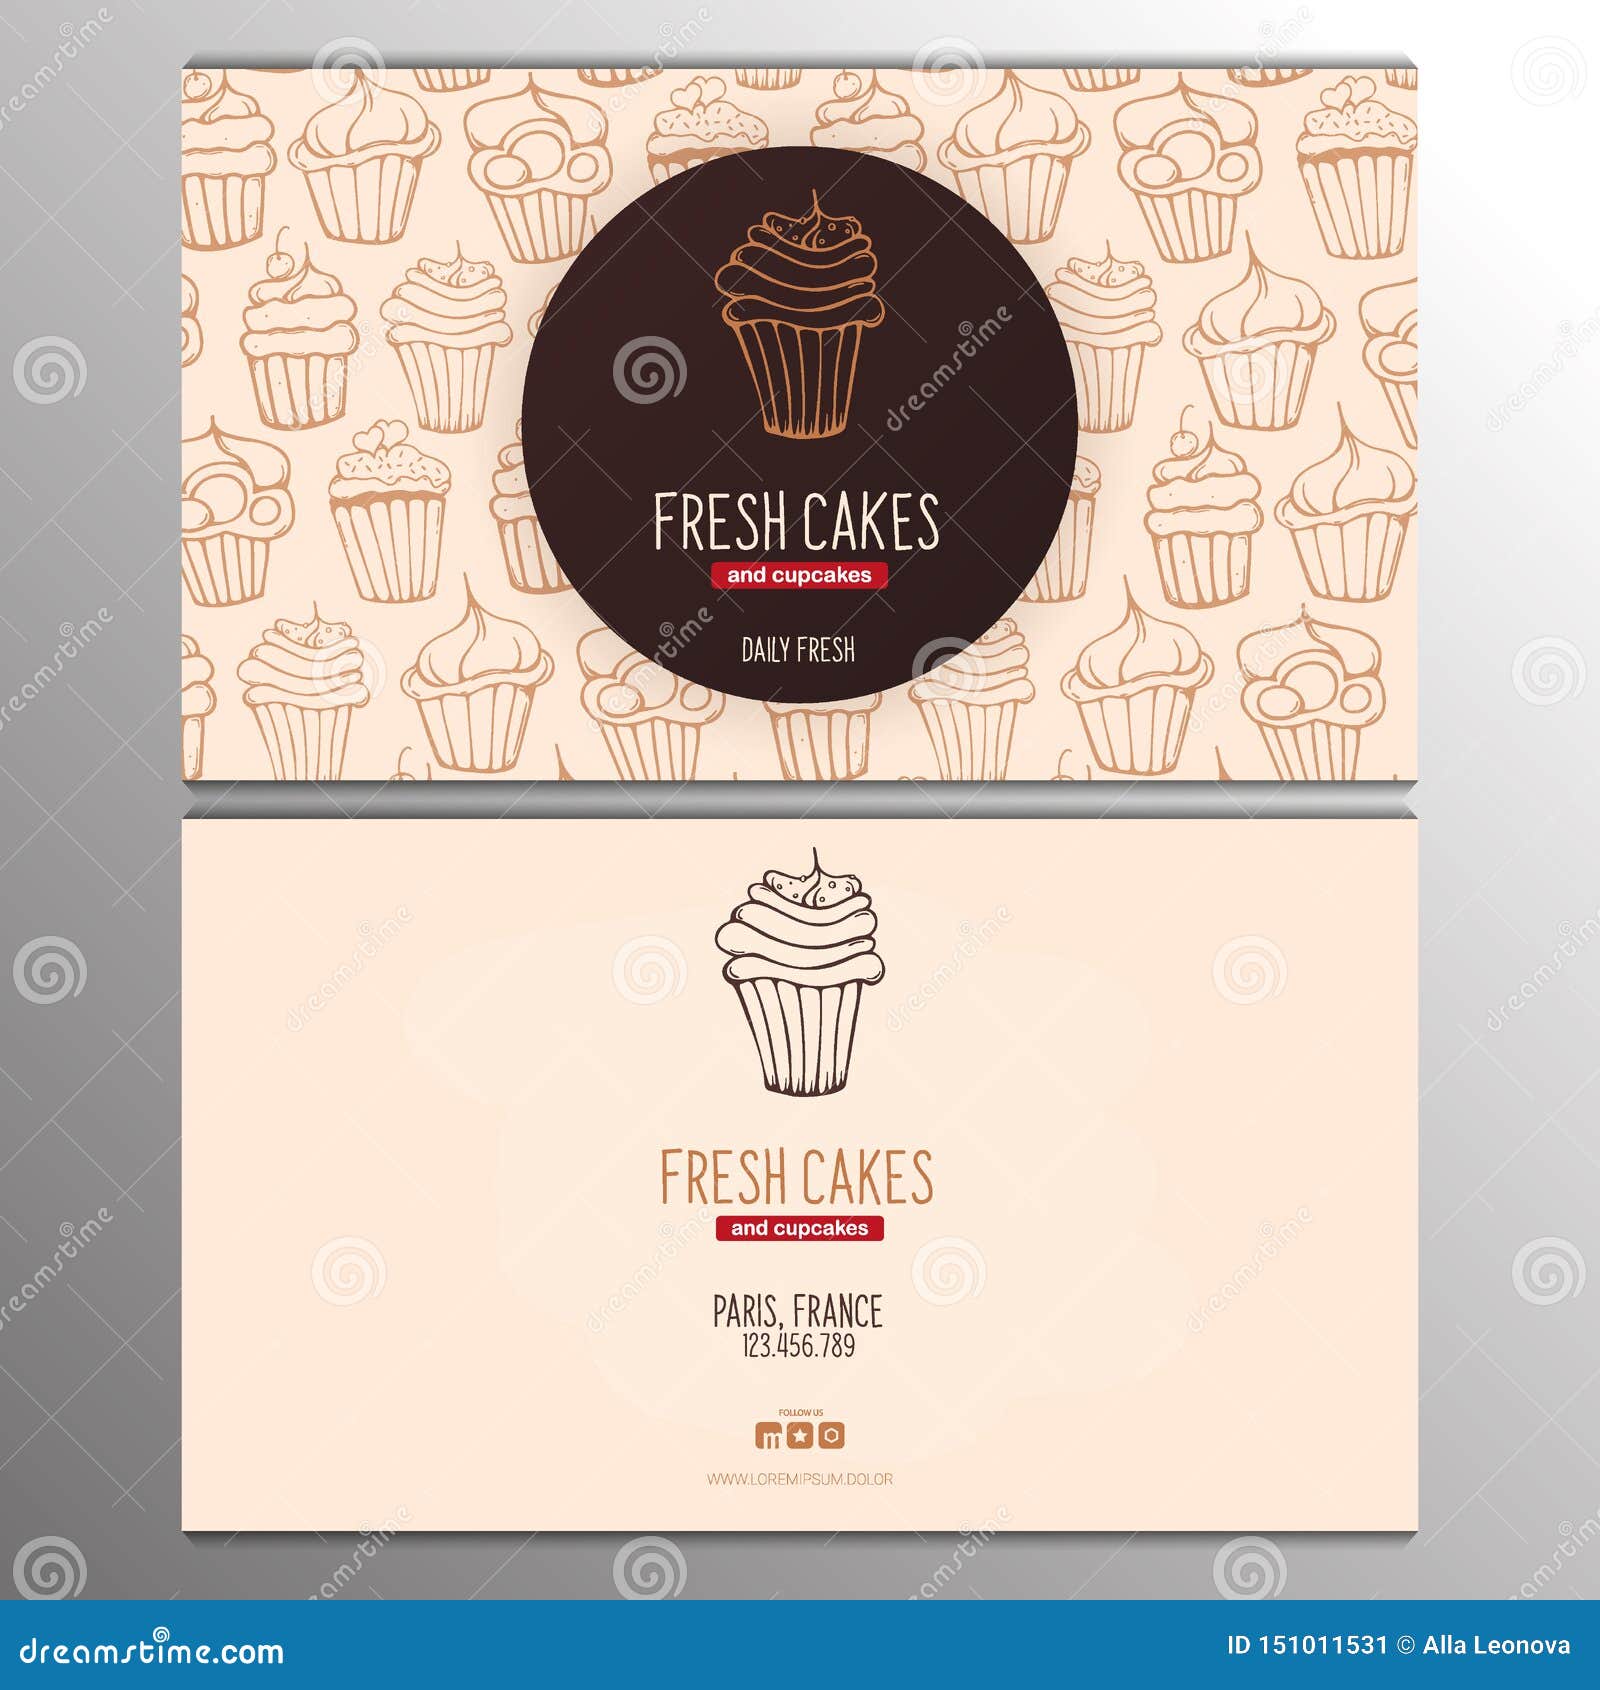 Cupcake or Cake Business Card Template for Bakery or Pastry. Stock With Regard To Cake Business Cards Templates Free